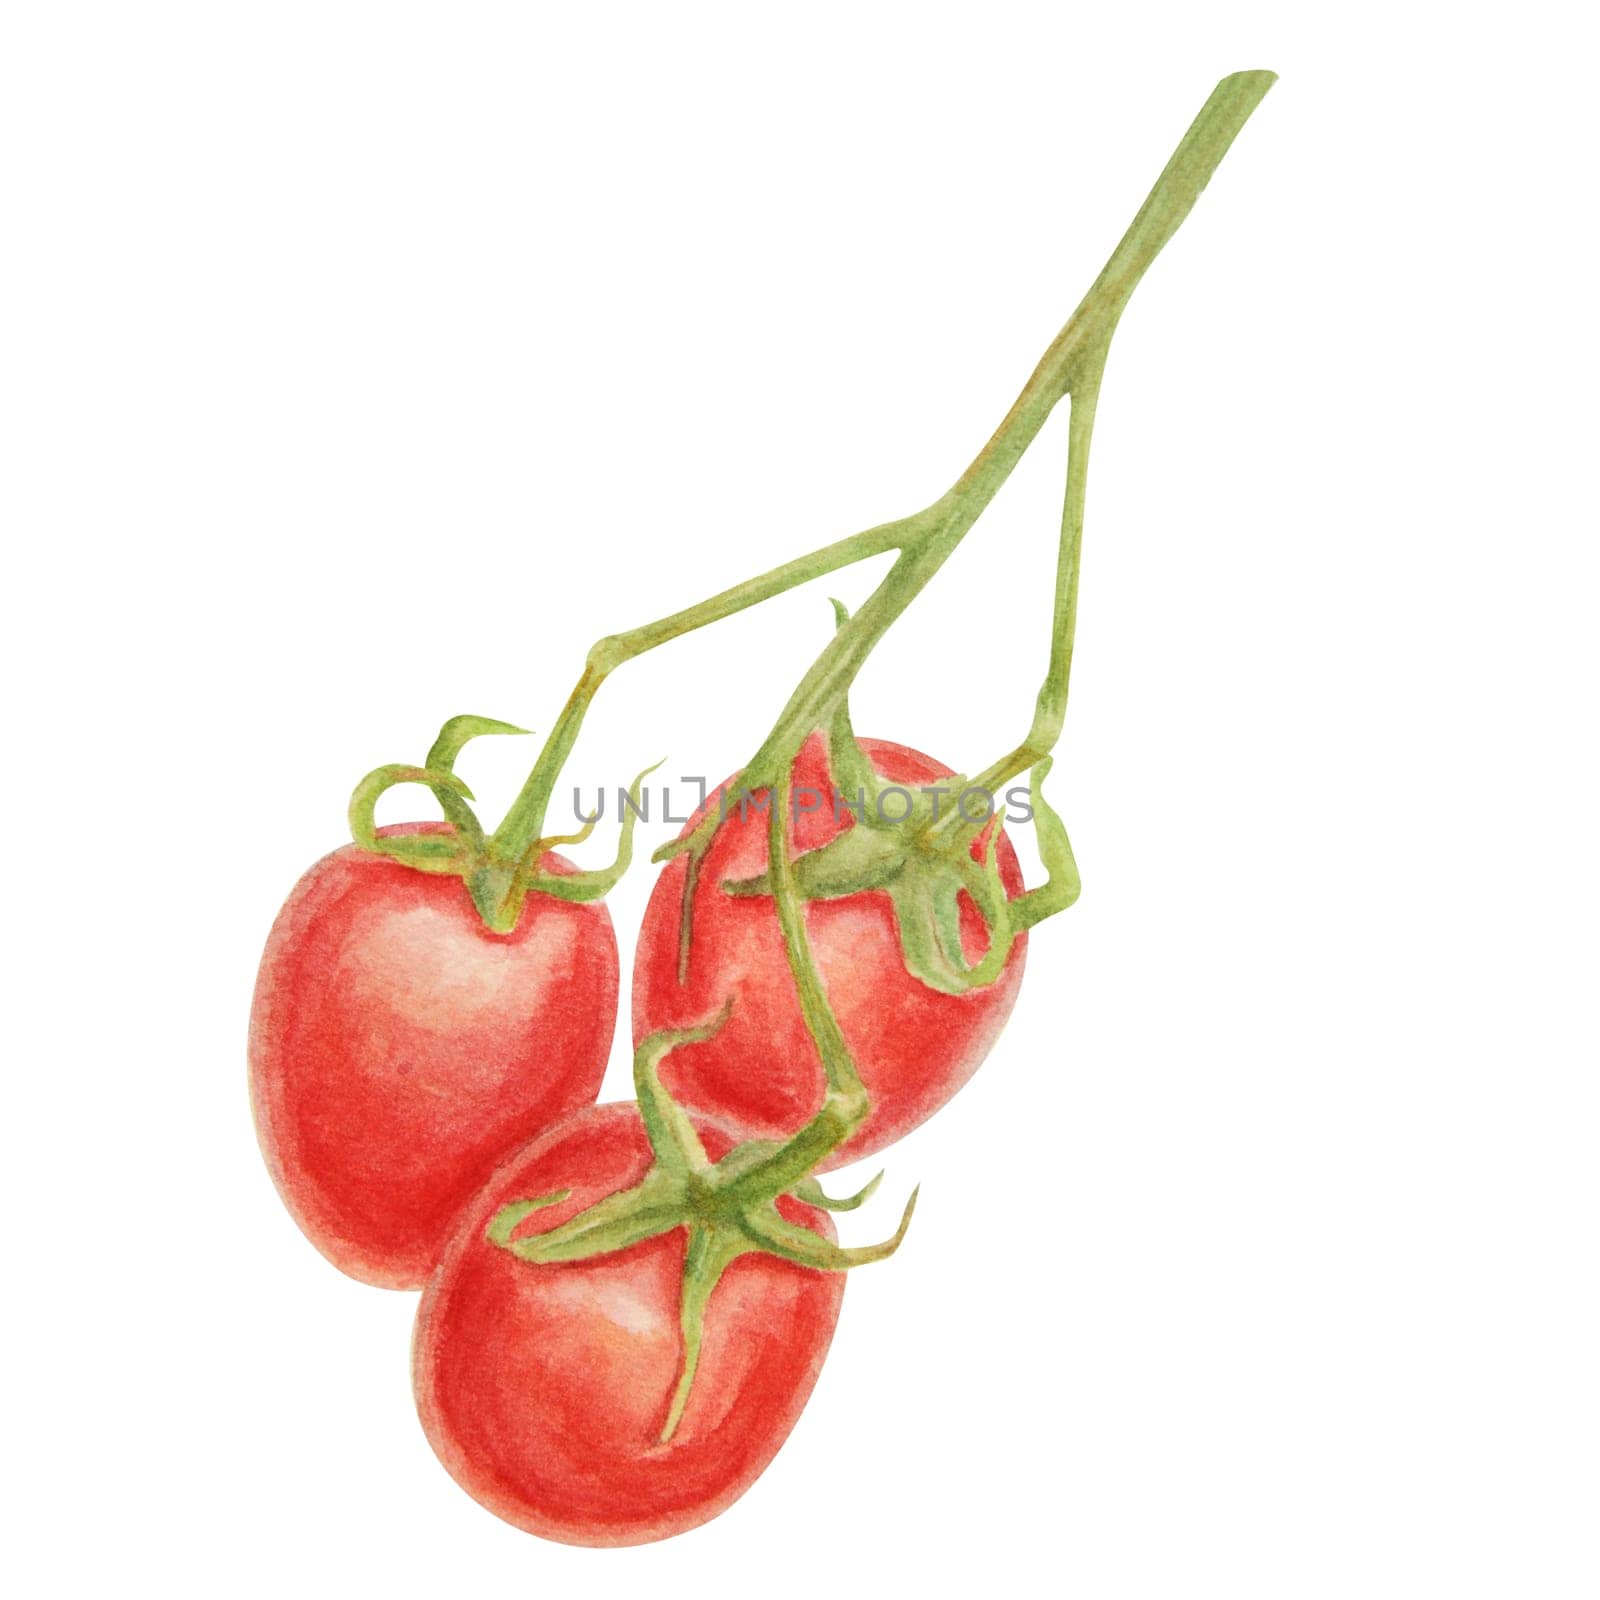 Fresh ripe cherry tomatoes on the branch. Hand drawn watercolor illustration of red organic vegetable, close-up, vegetarian food, natural ingredient, package design element. Realistic botanical painting